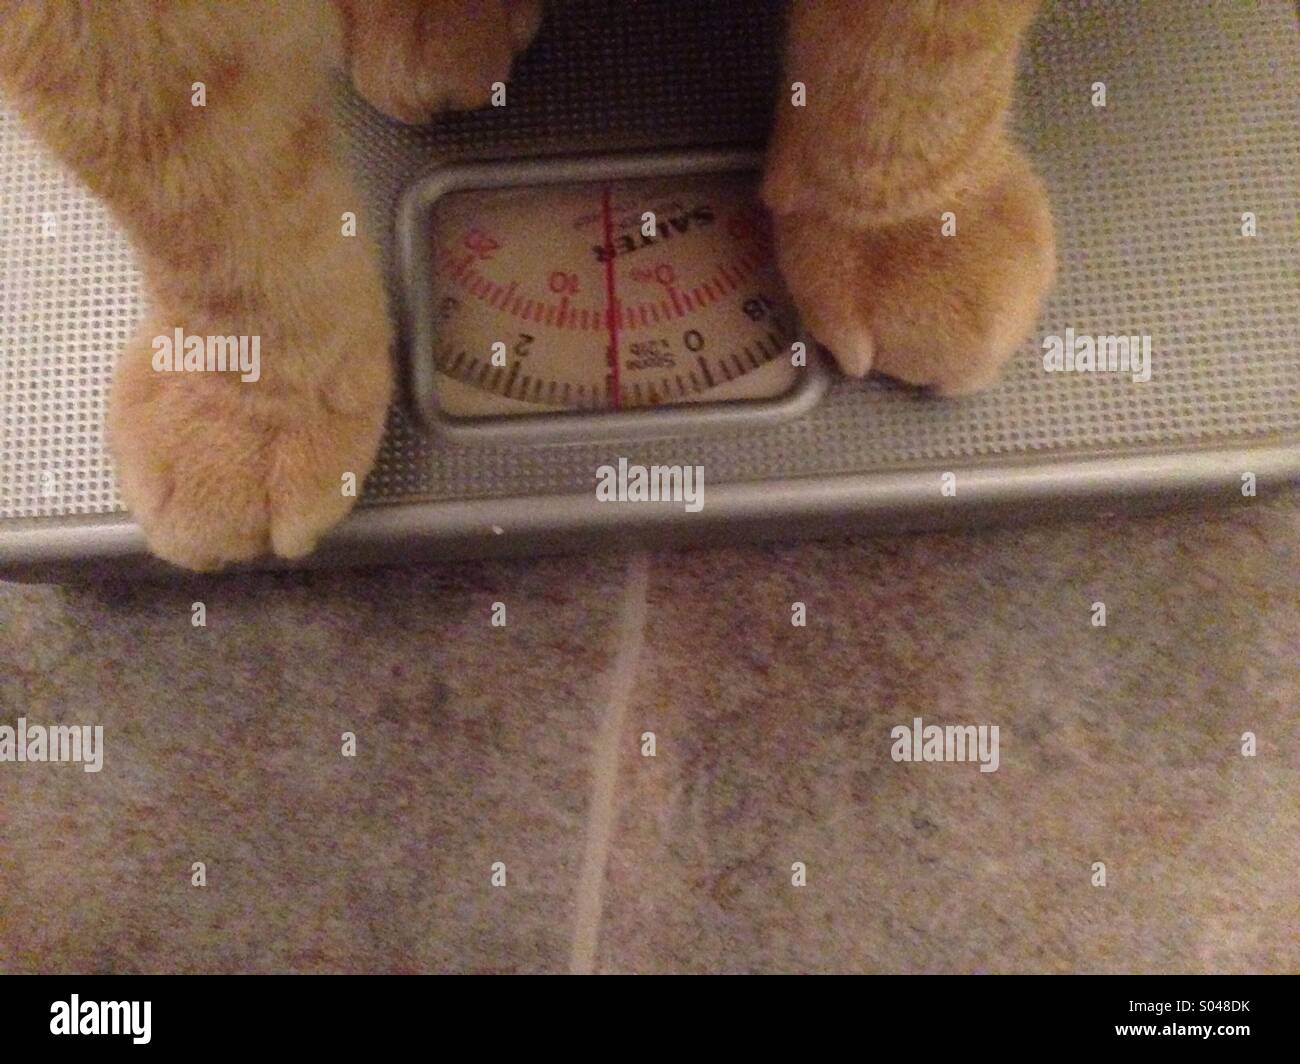 Cats paws on a weighing scale Stock Photo